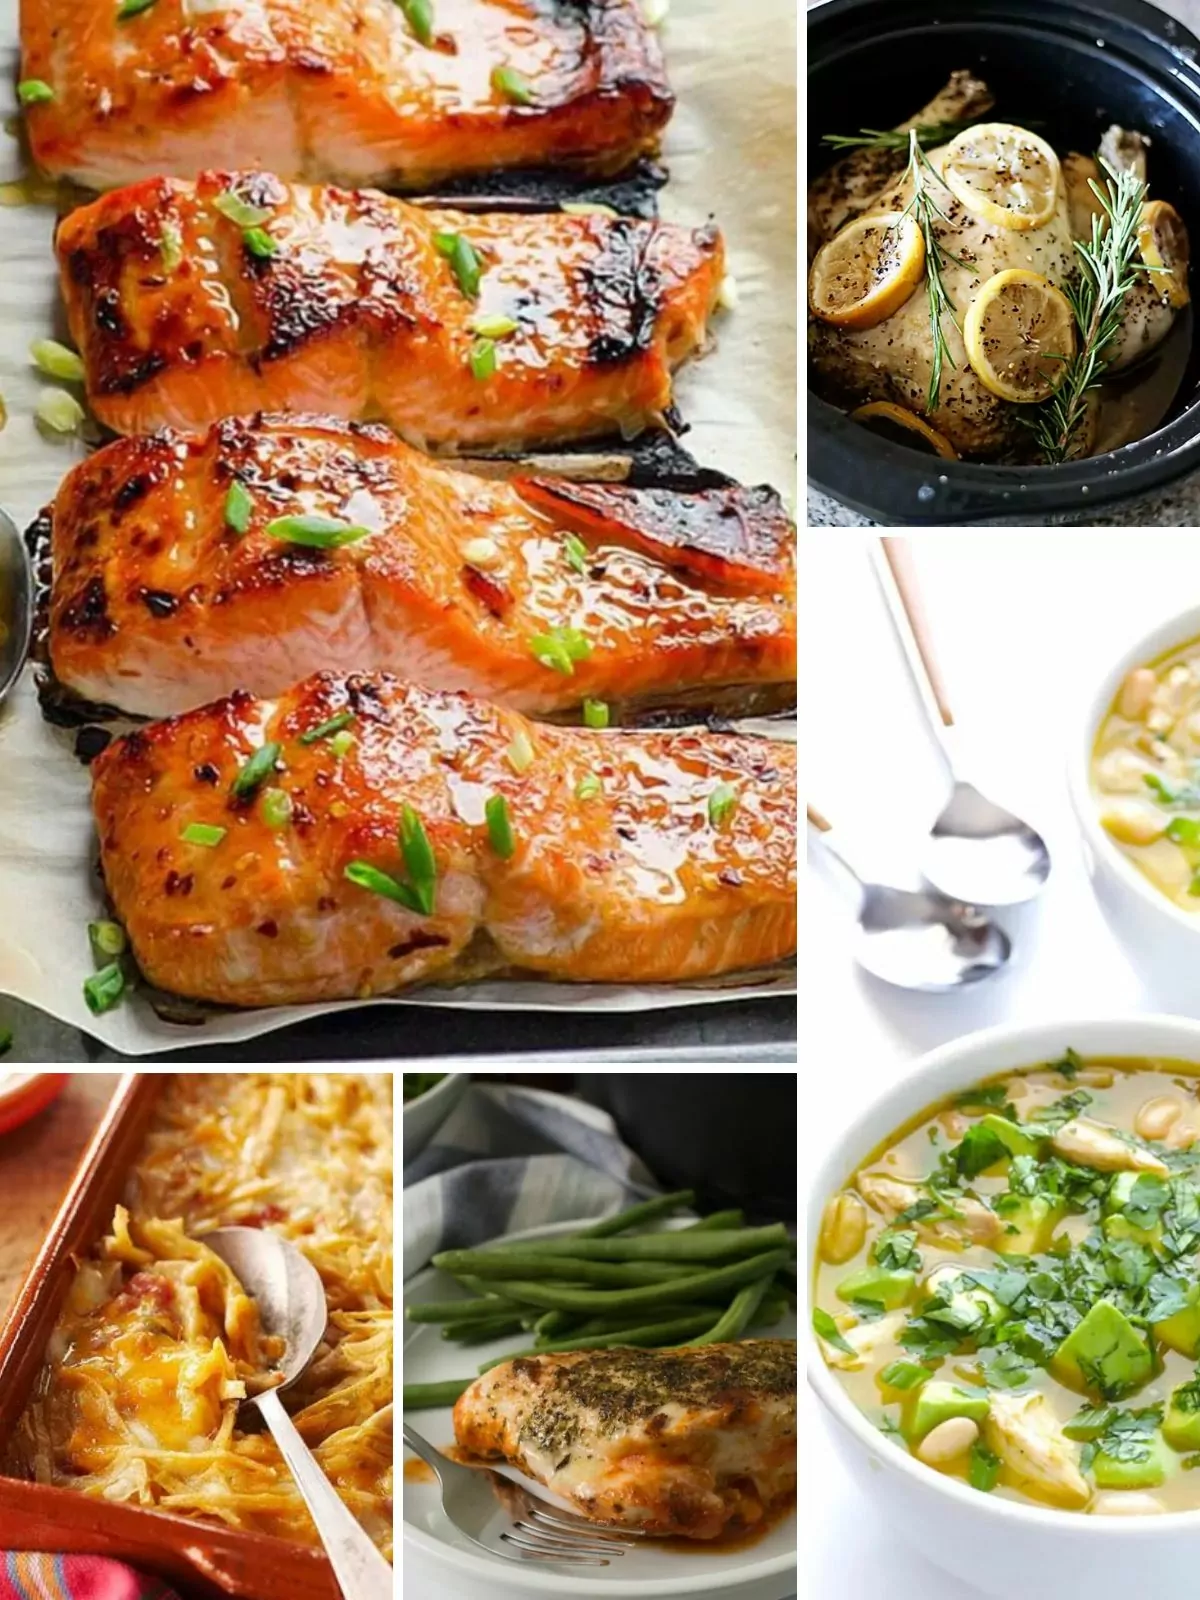 dinner recipes made with few ingredients.